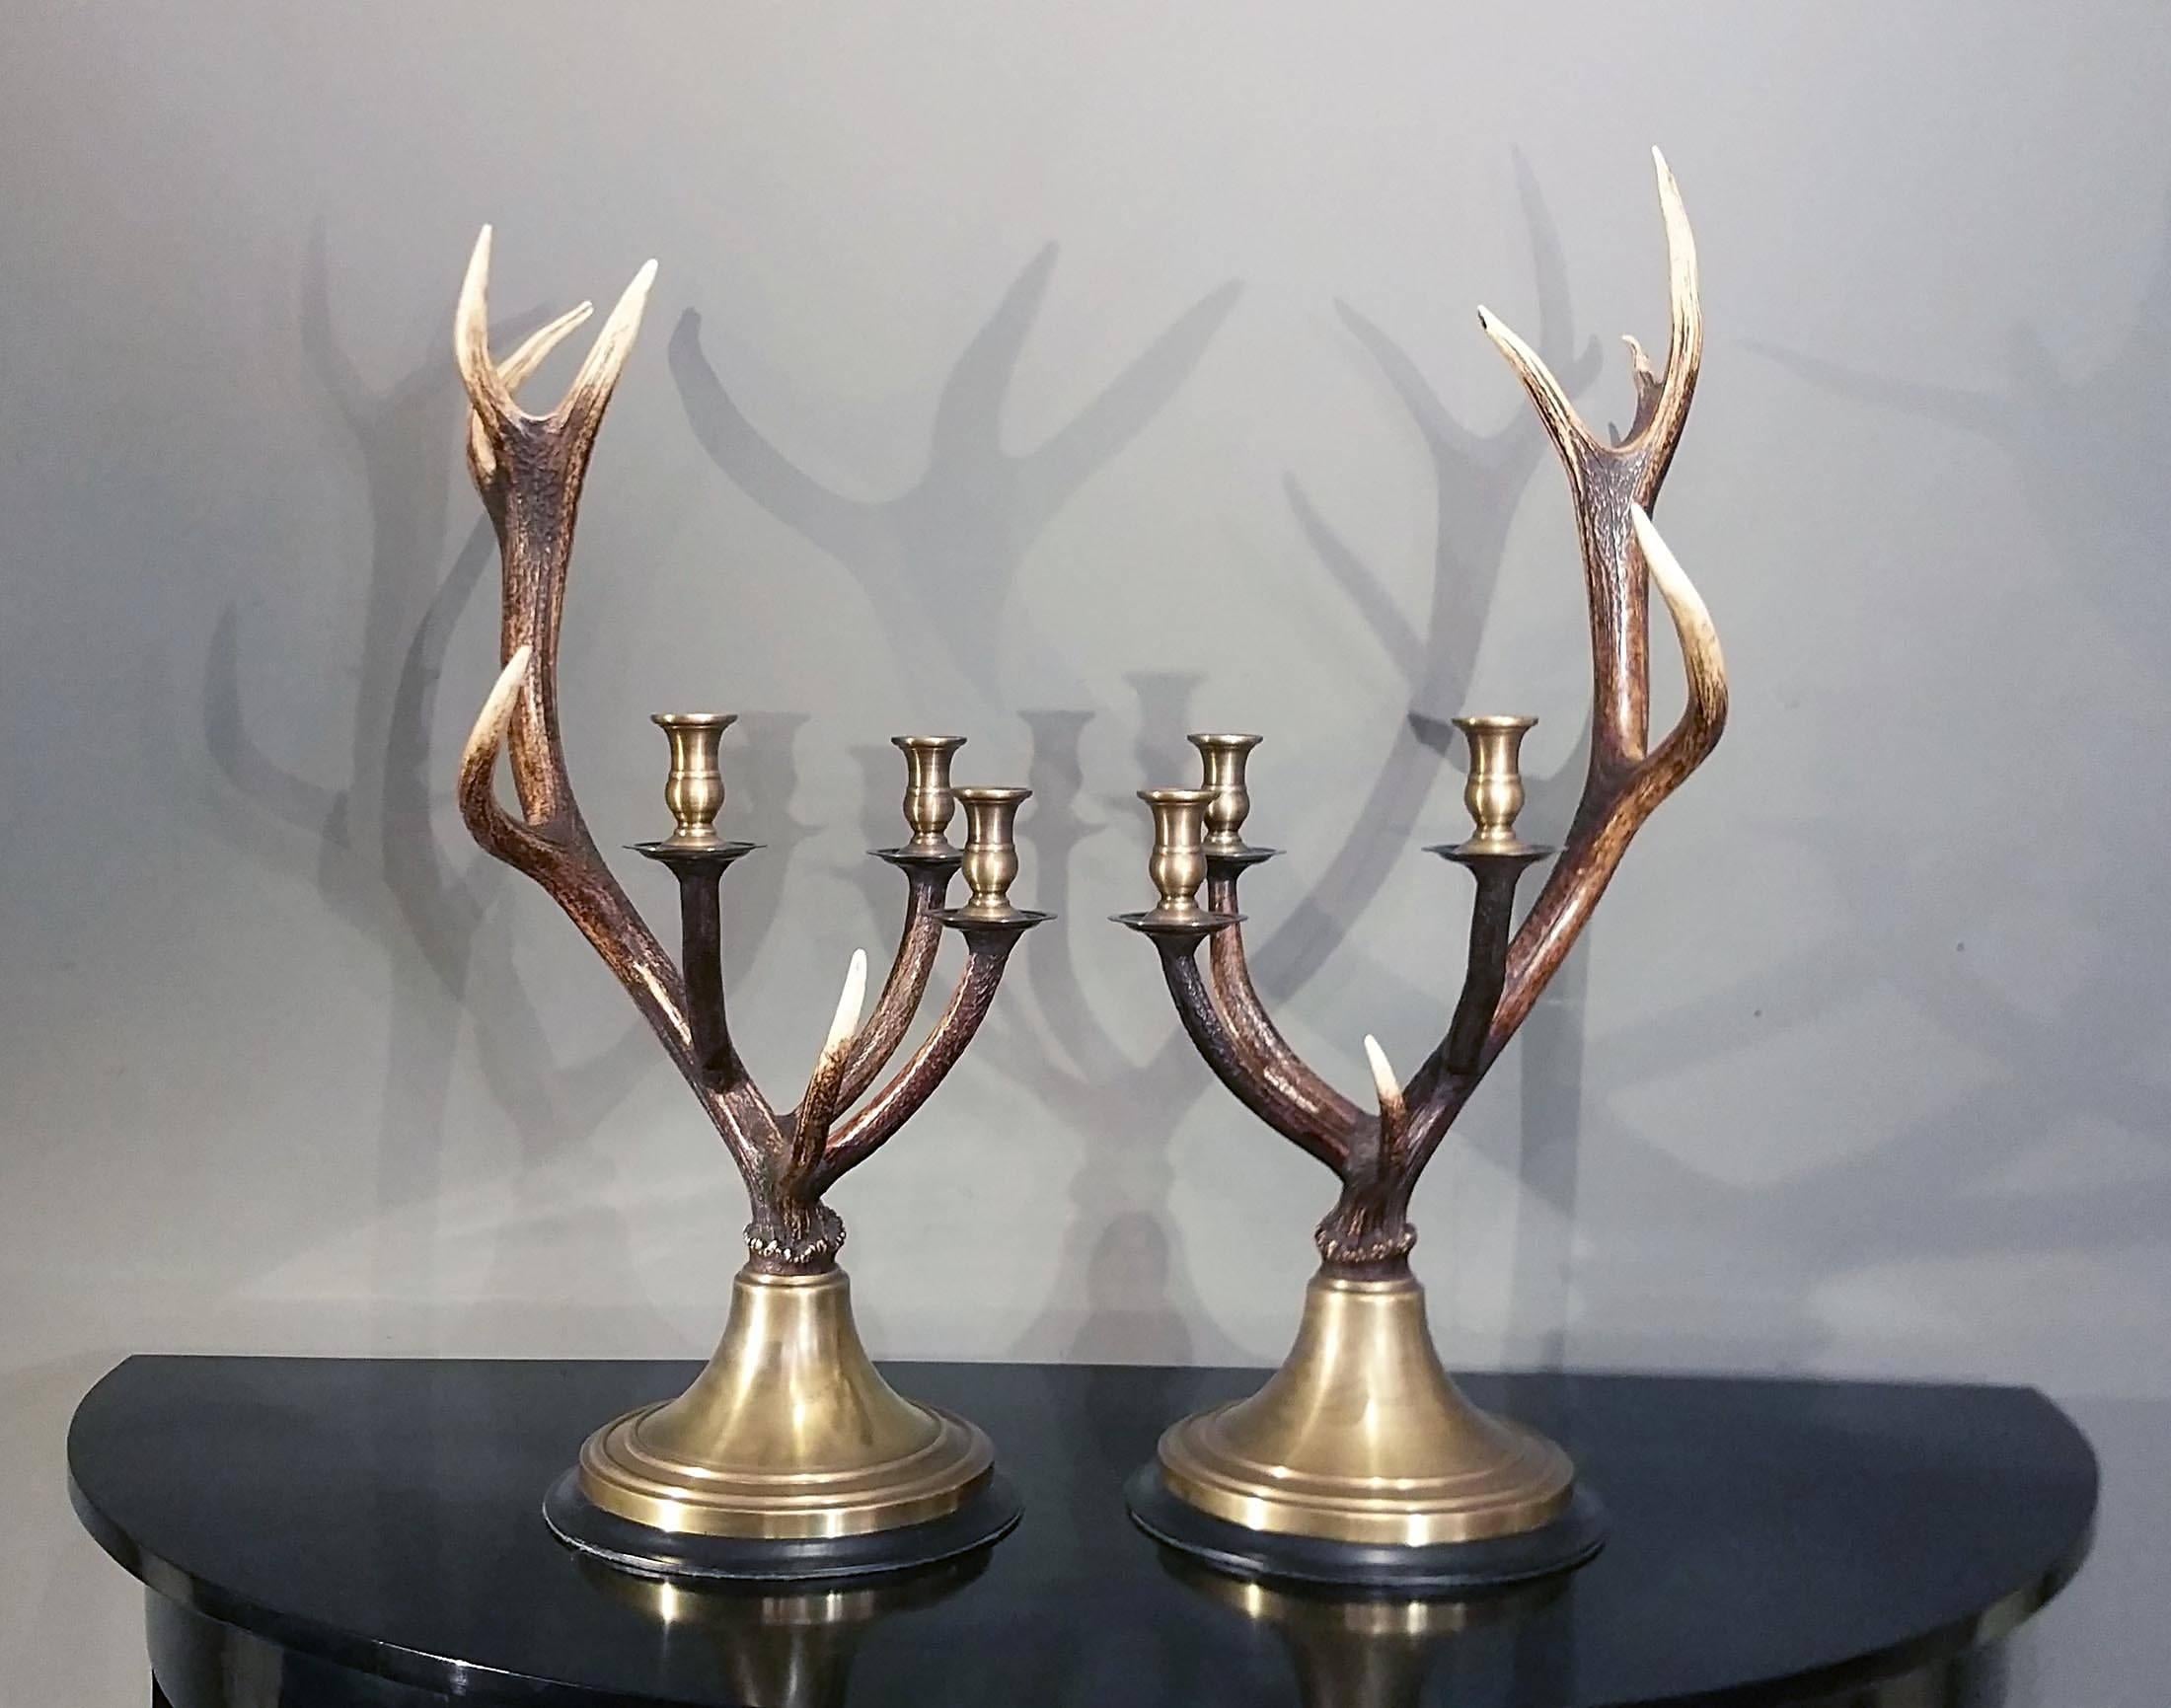 This striking design of naturally shed deer antlers have a trio of polished brass candlestick cups attached around the center and is mounted on a matching brass circular base. They are unique and yet have a contemporary look that would make a lovely